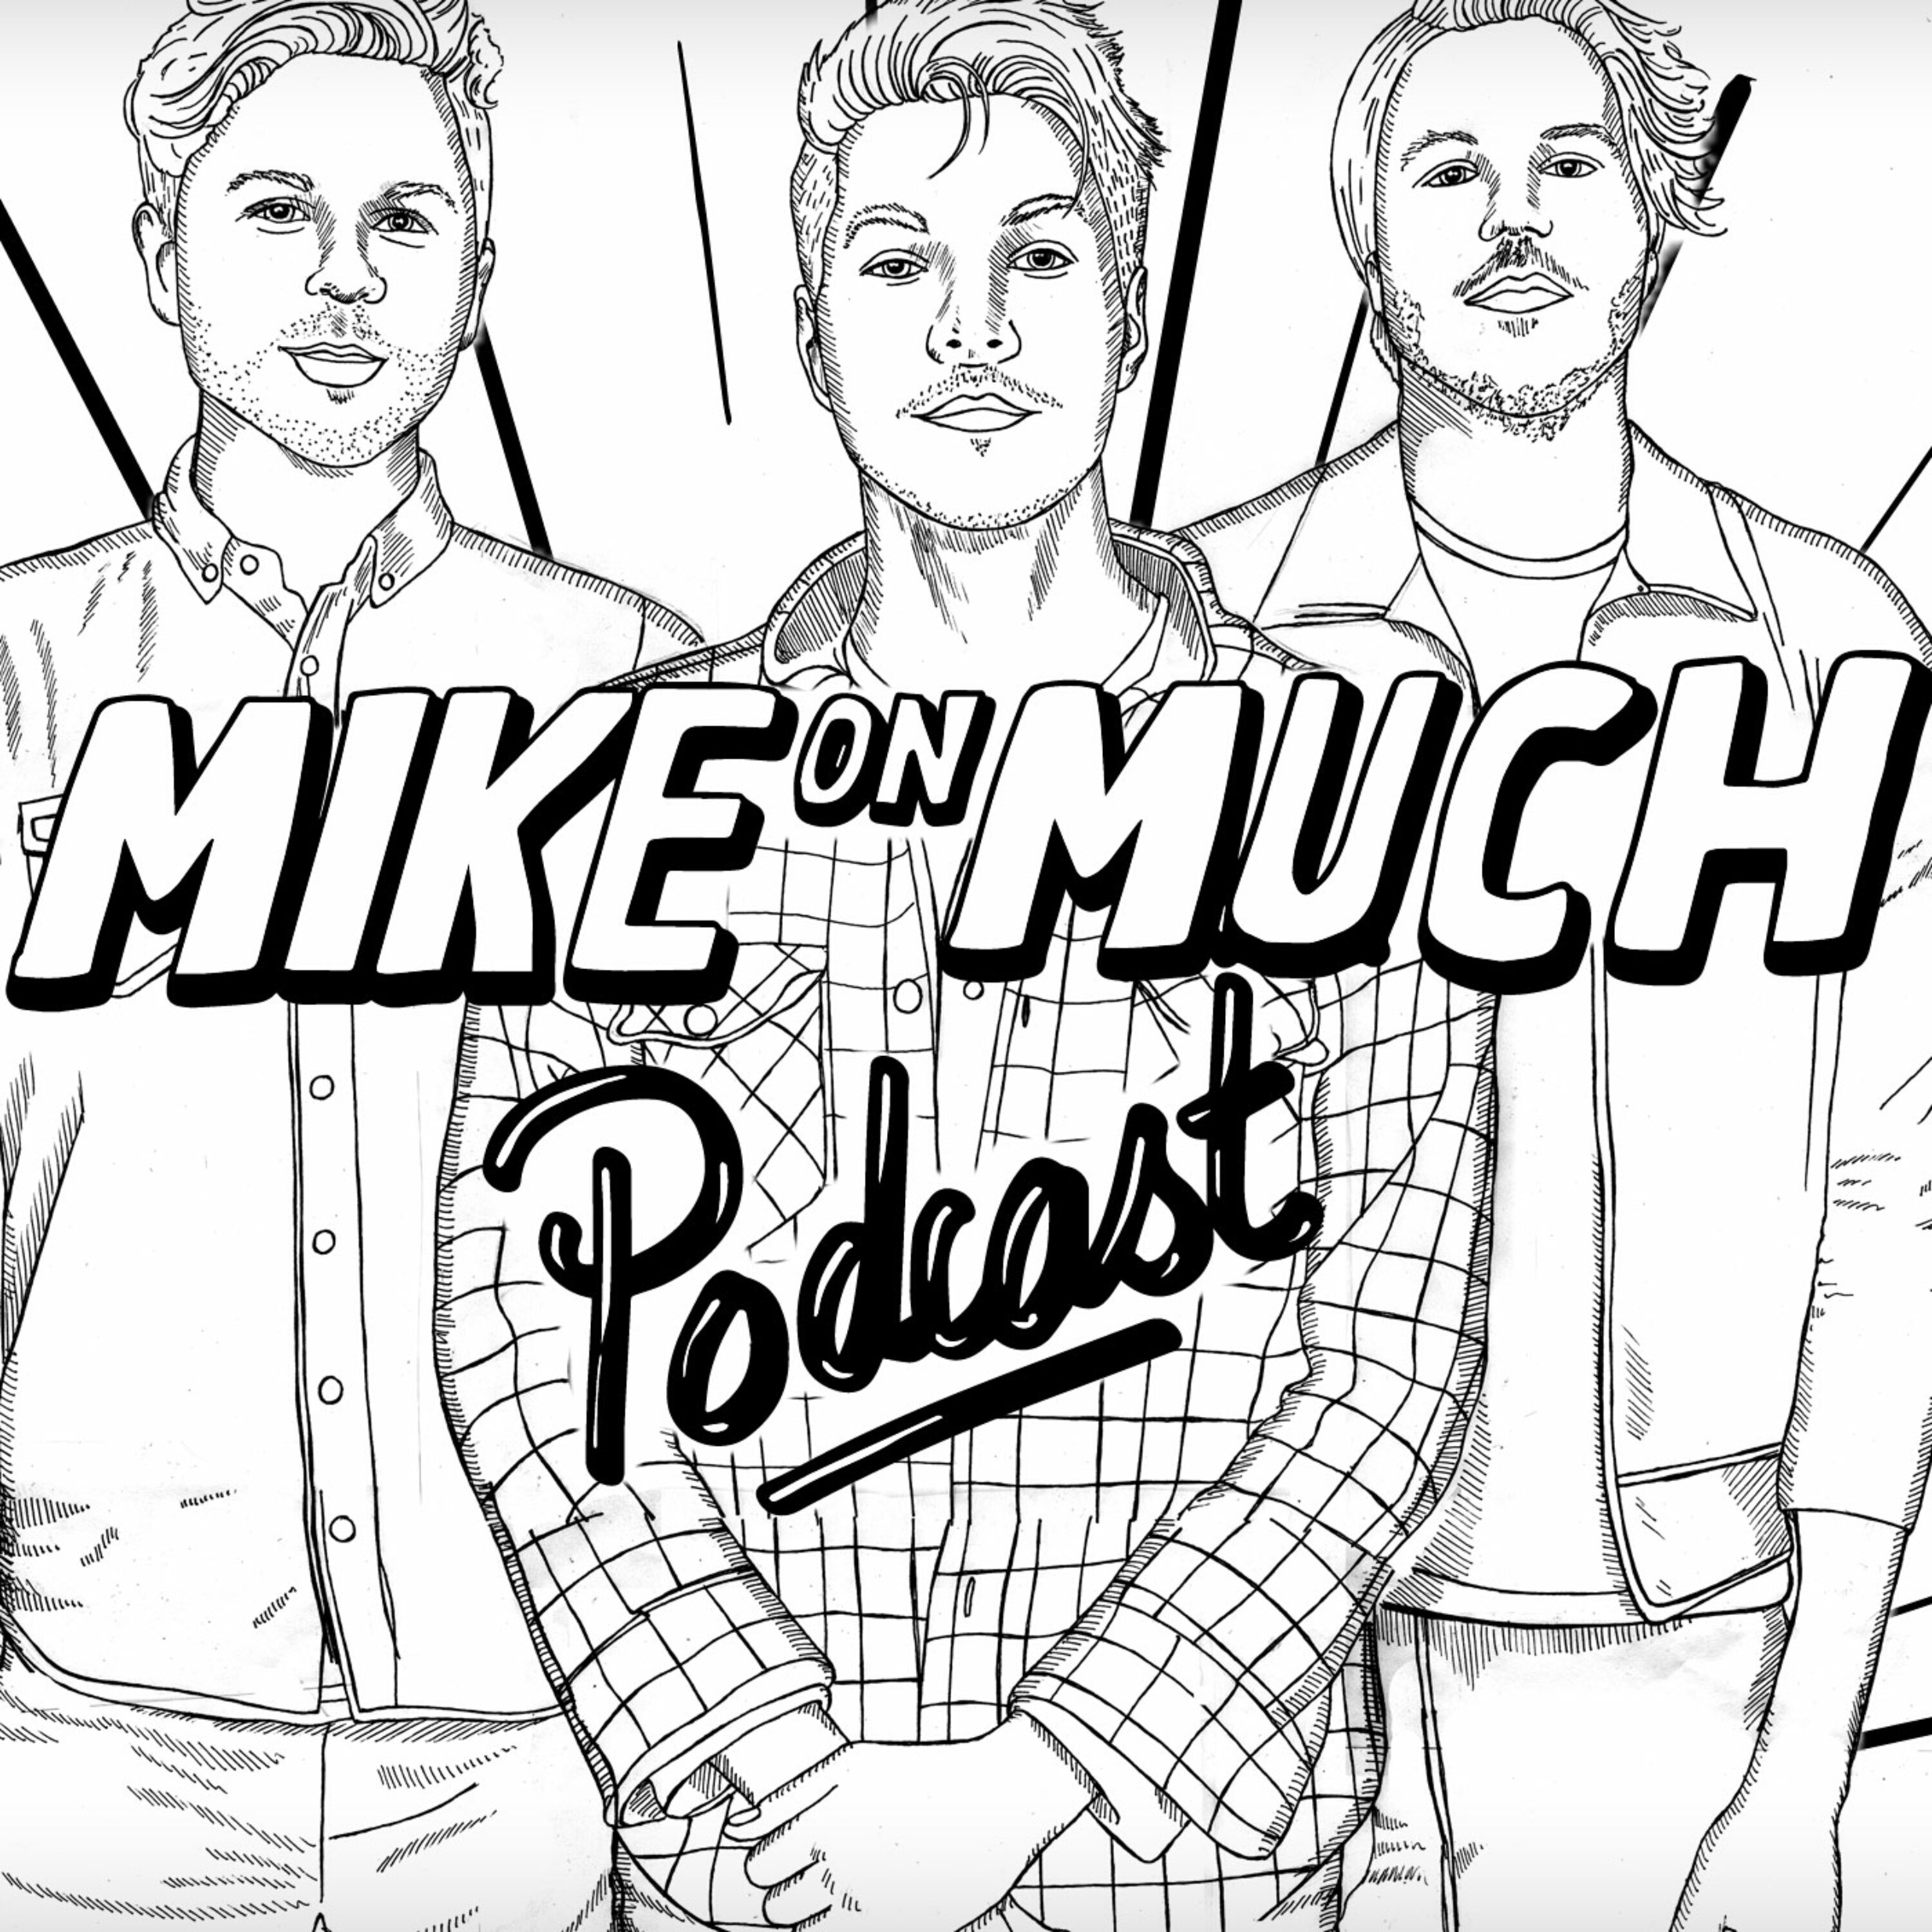 Season 1 Mike On Much: HOLIDAY TREAT - TV/MOVIES